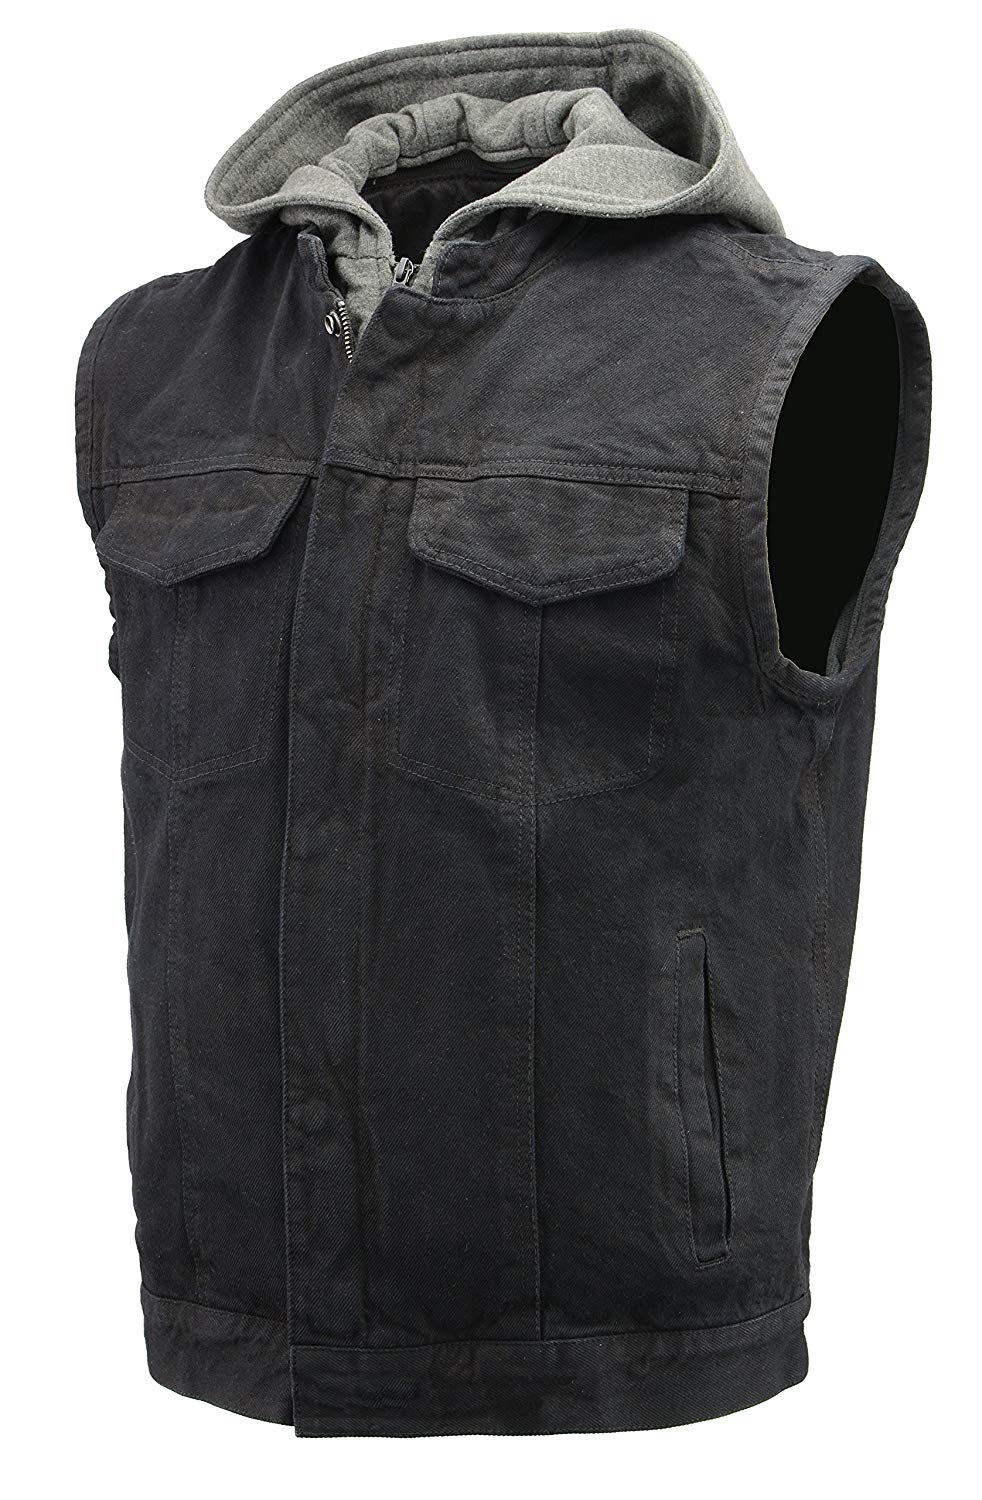 Men’s Denim Rustic and Casual Black Jean Club Style Vest with Removable Hoodie BZ7200